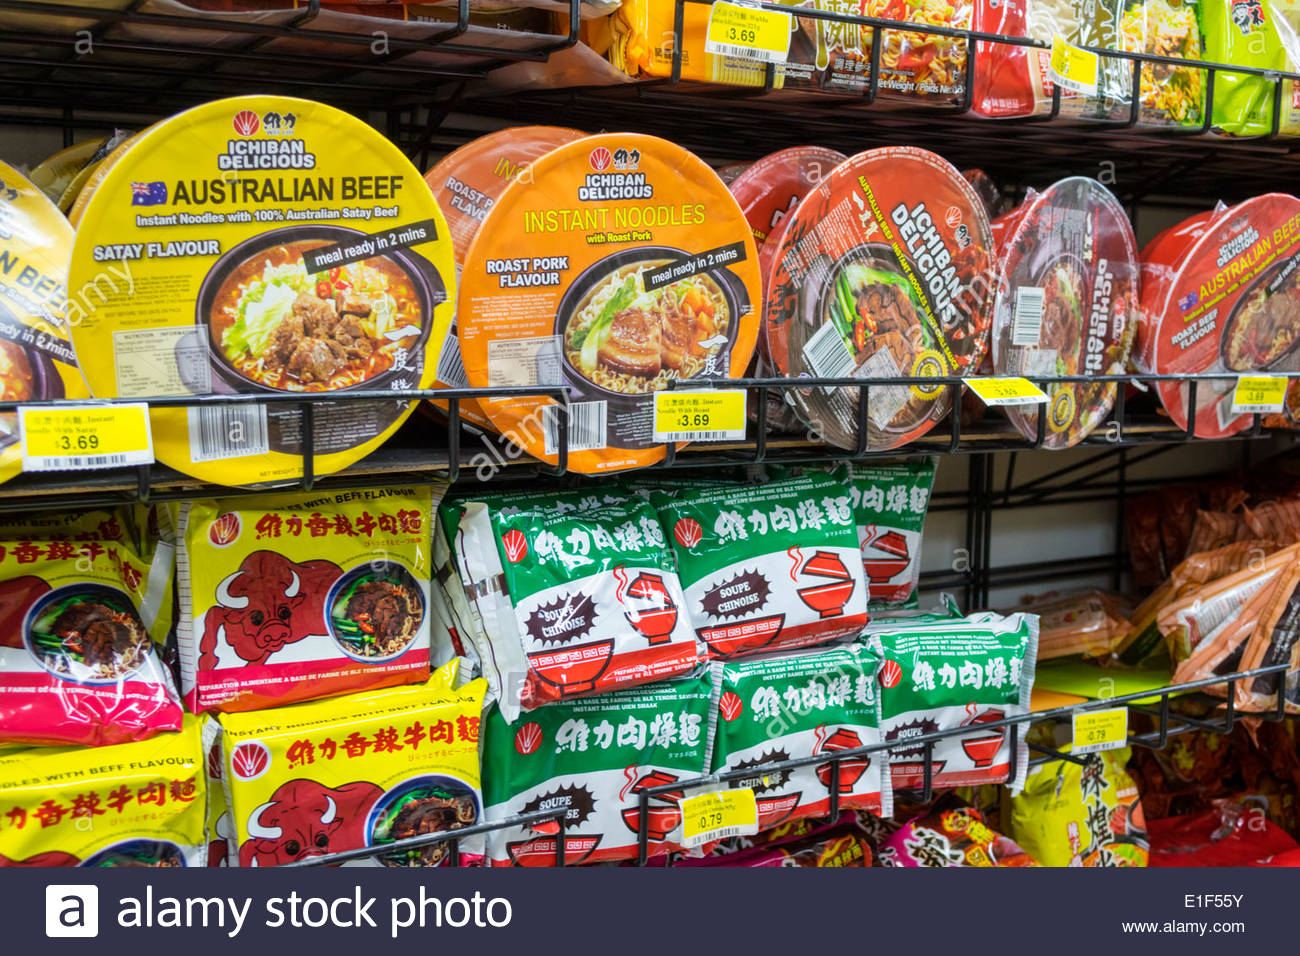 Asian Grocery Store Supermarket Food Stock Photos & Asian Grocery ...